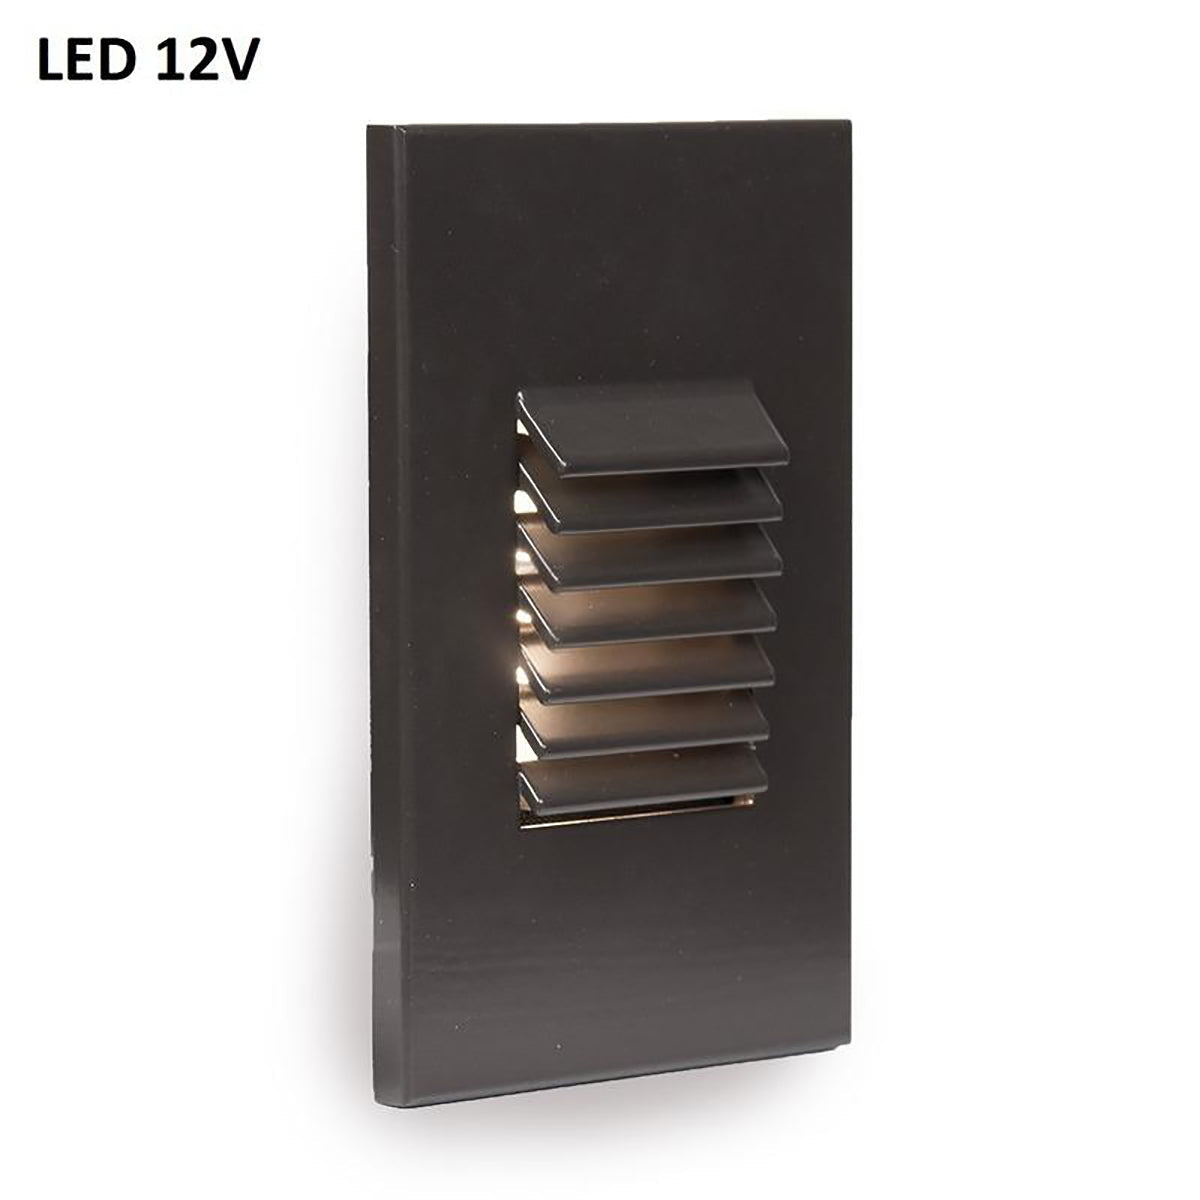 Low Voltage 4061 Vertical Louvered Step and Wall Light